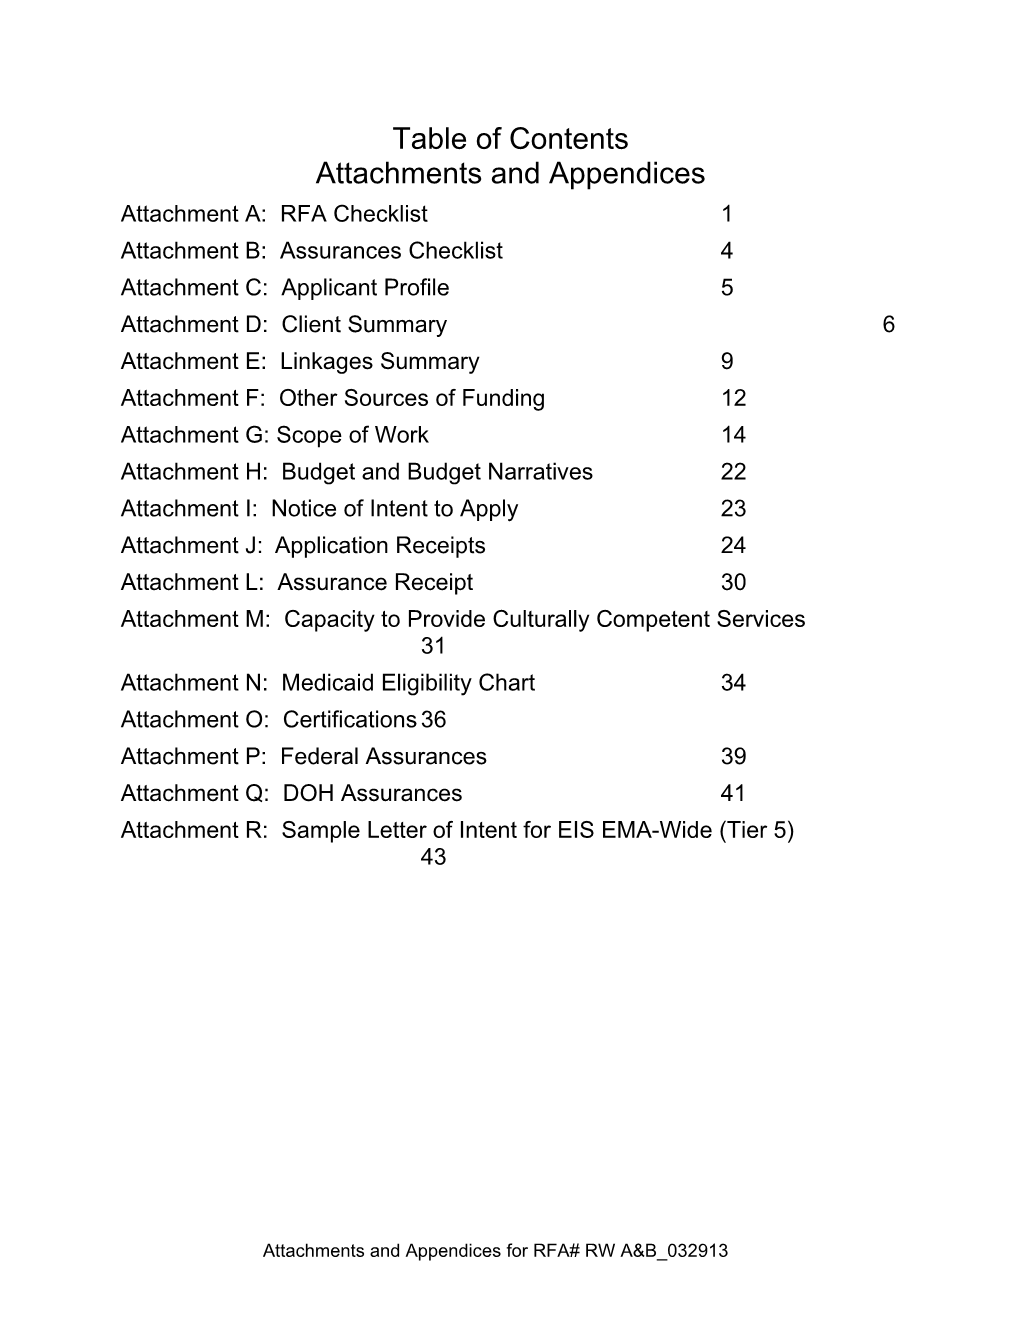 Table of Contents Attachments and Appendices